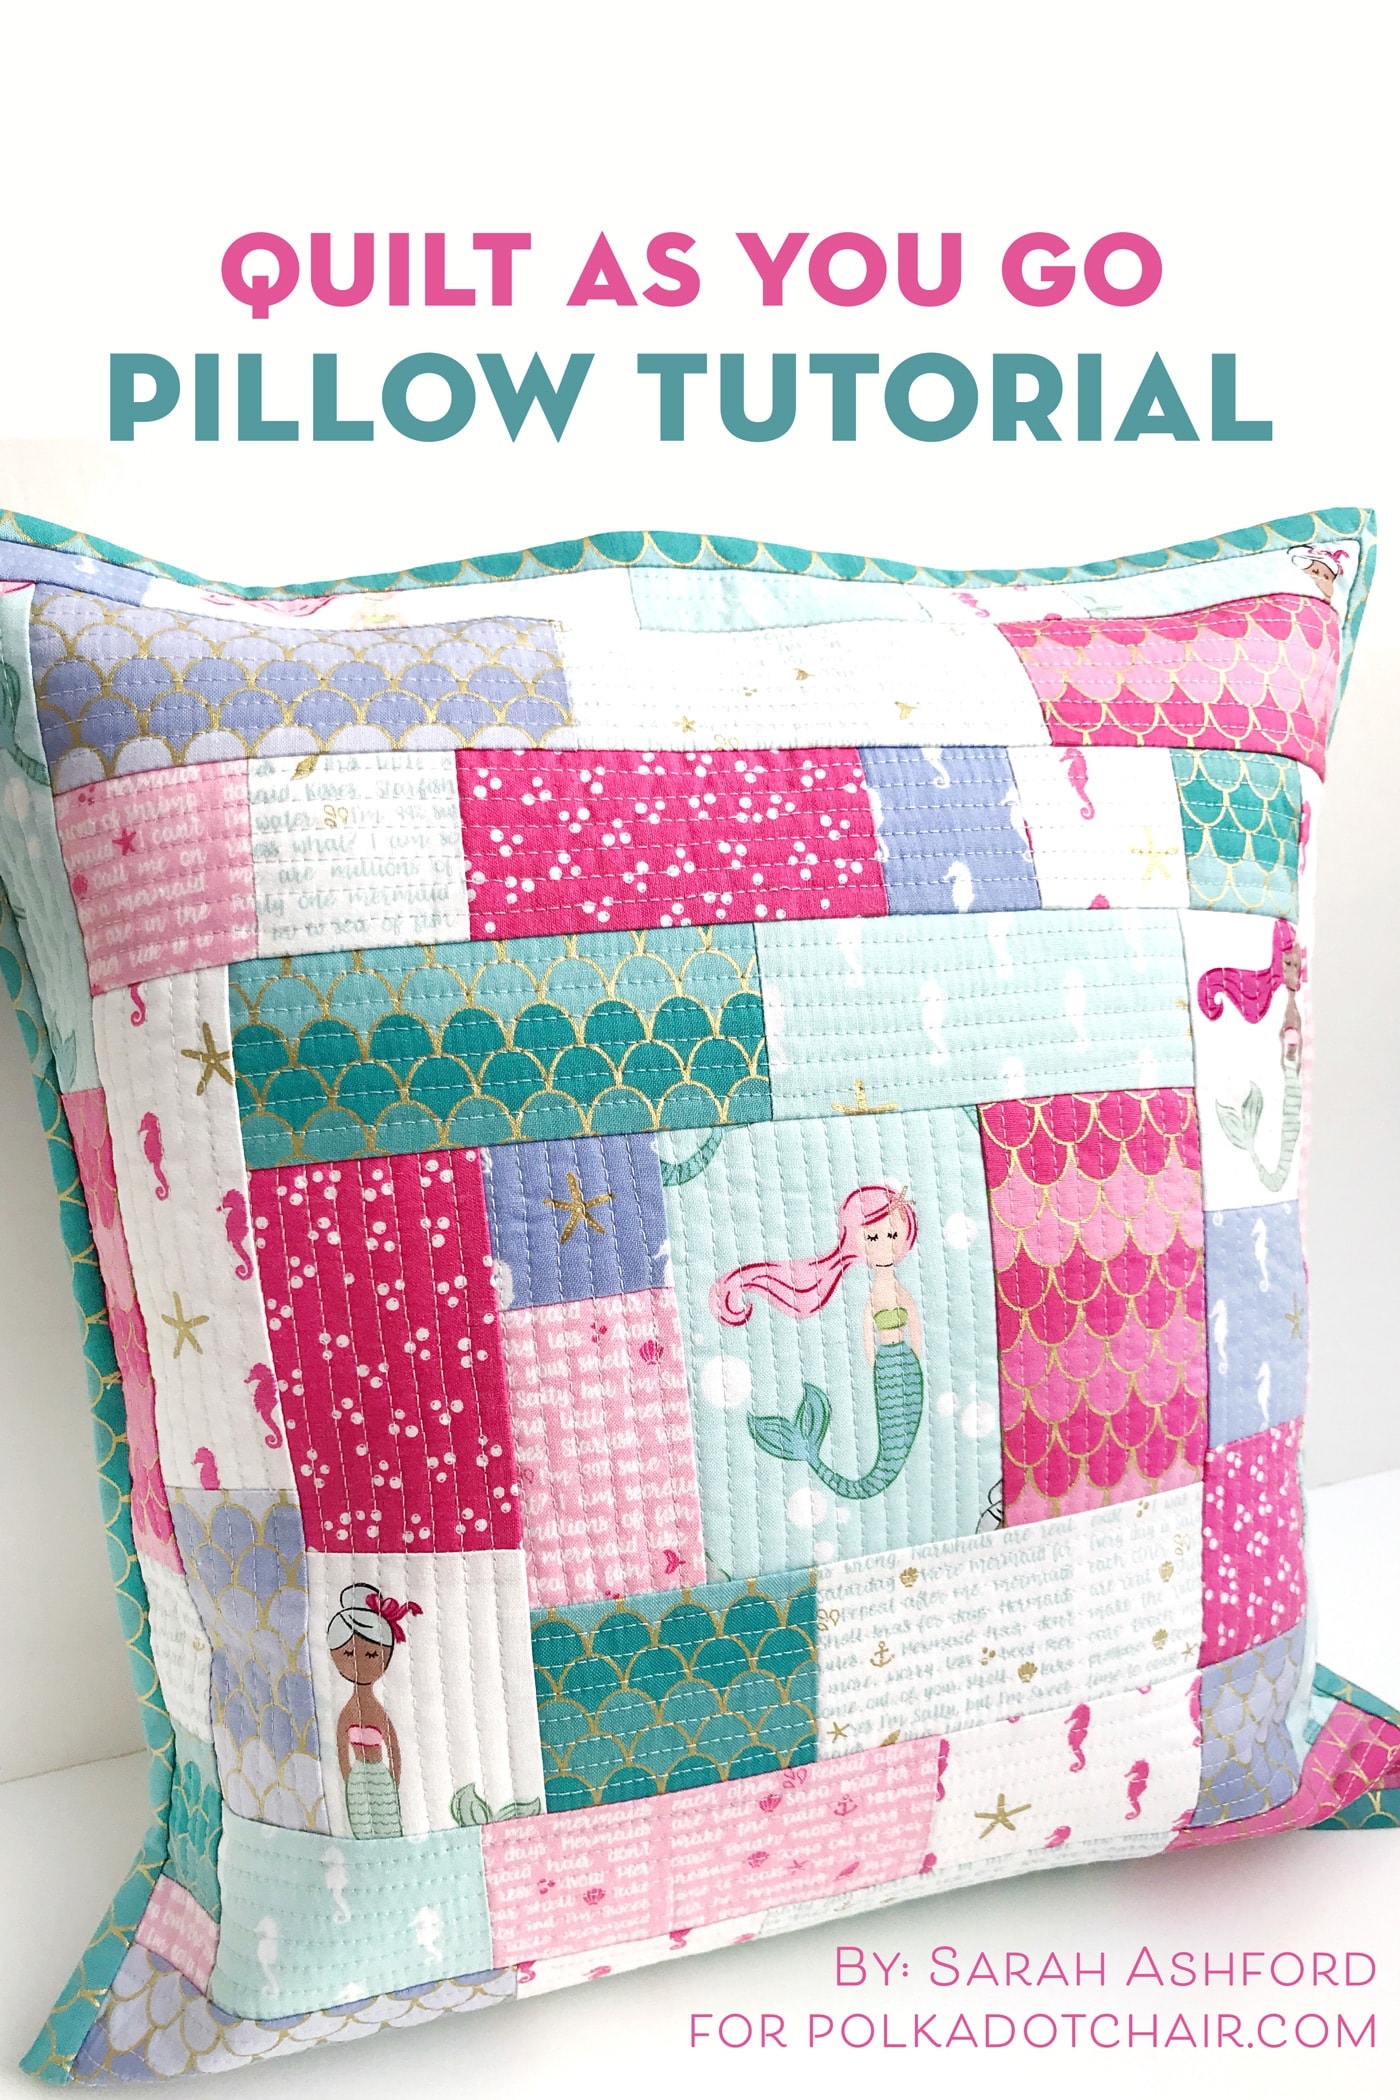 https://www.polkadotchair.com/wp-content/uploads/2019/03/how-to-quilt-as-you-go.jpg